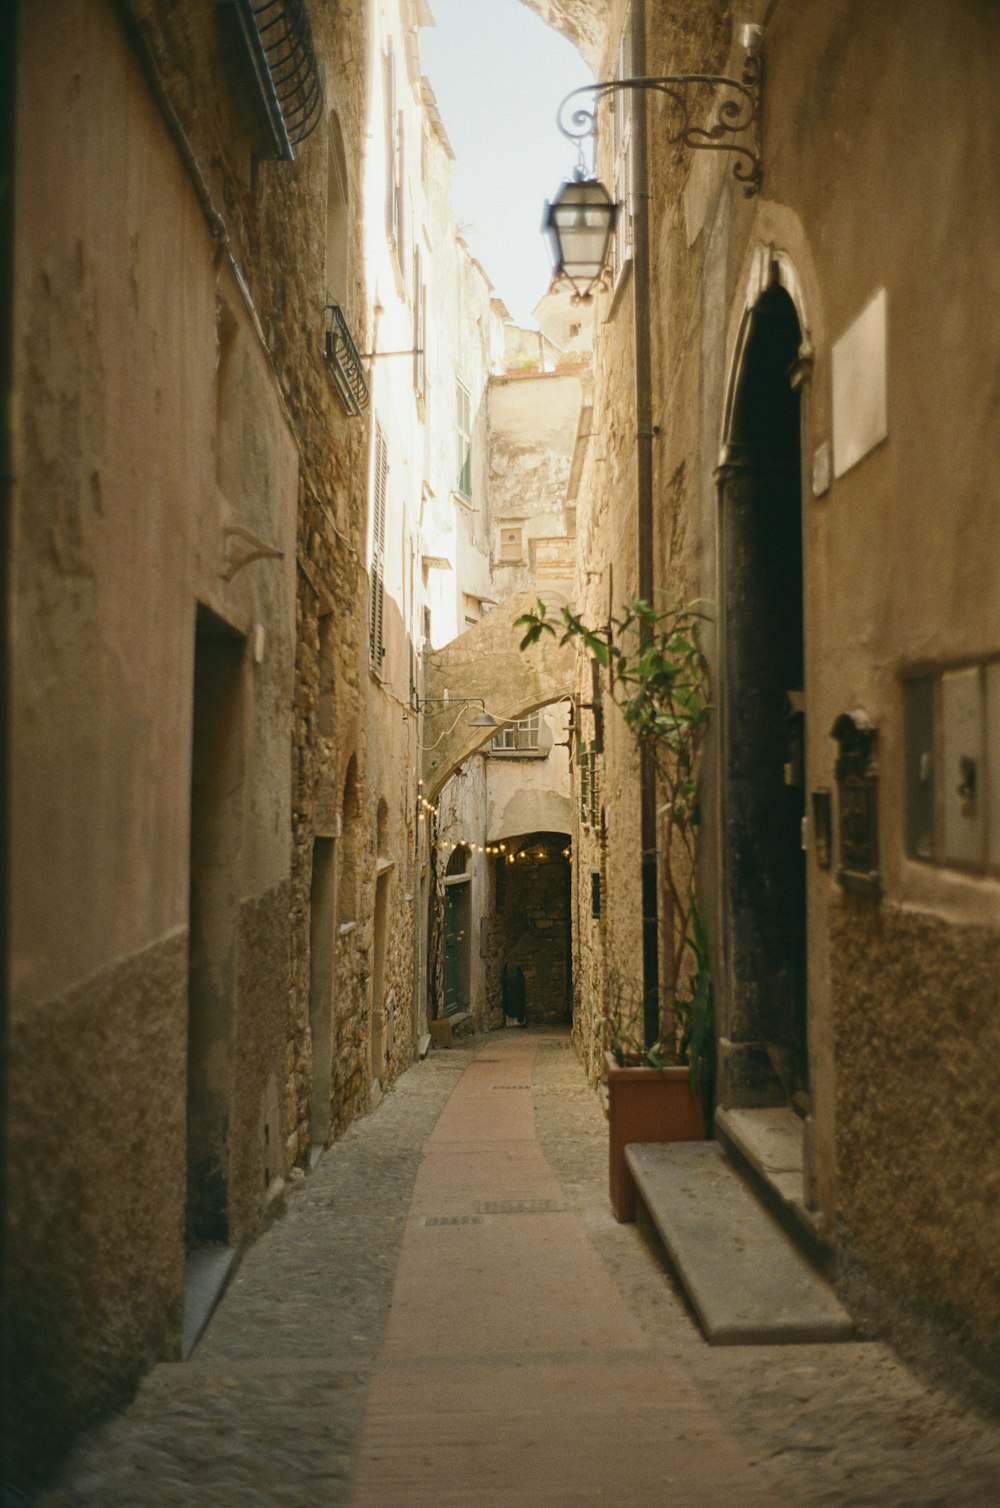 a narrow alley way with a potted plant in the middle